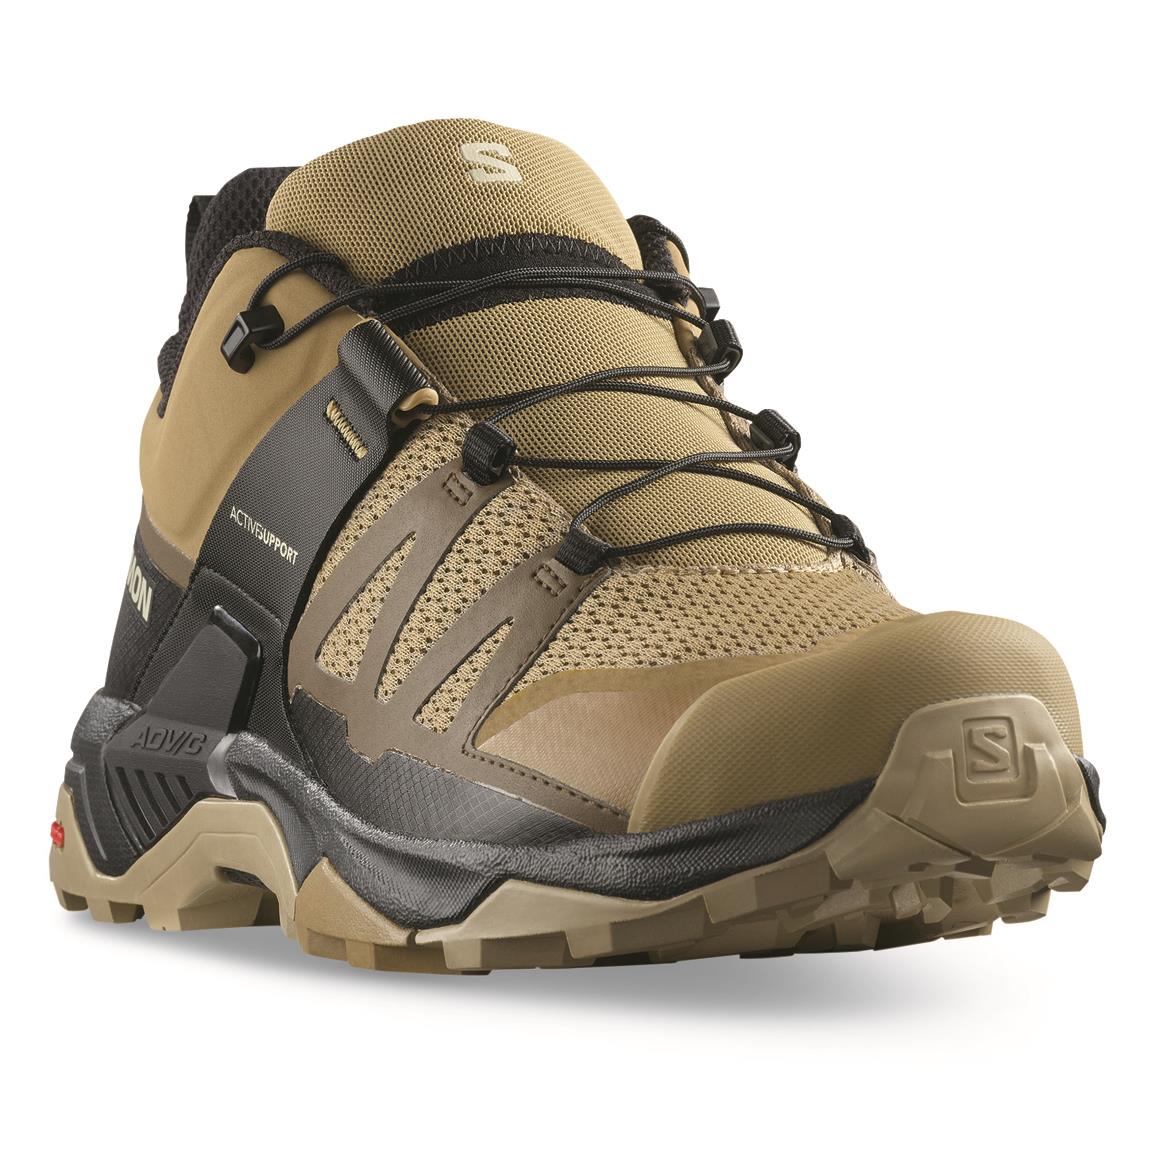 Salomon Men's X Ultra 4 Hiking Shoes - 719249, Hiking Boots & Shoes at ...